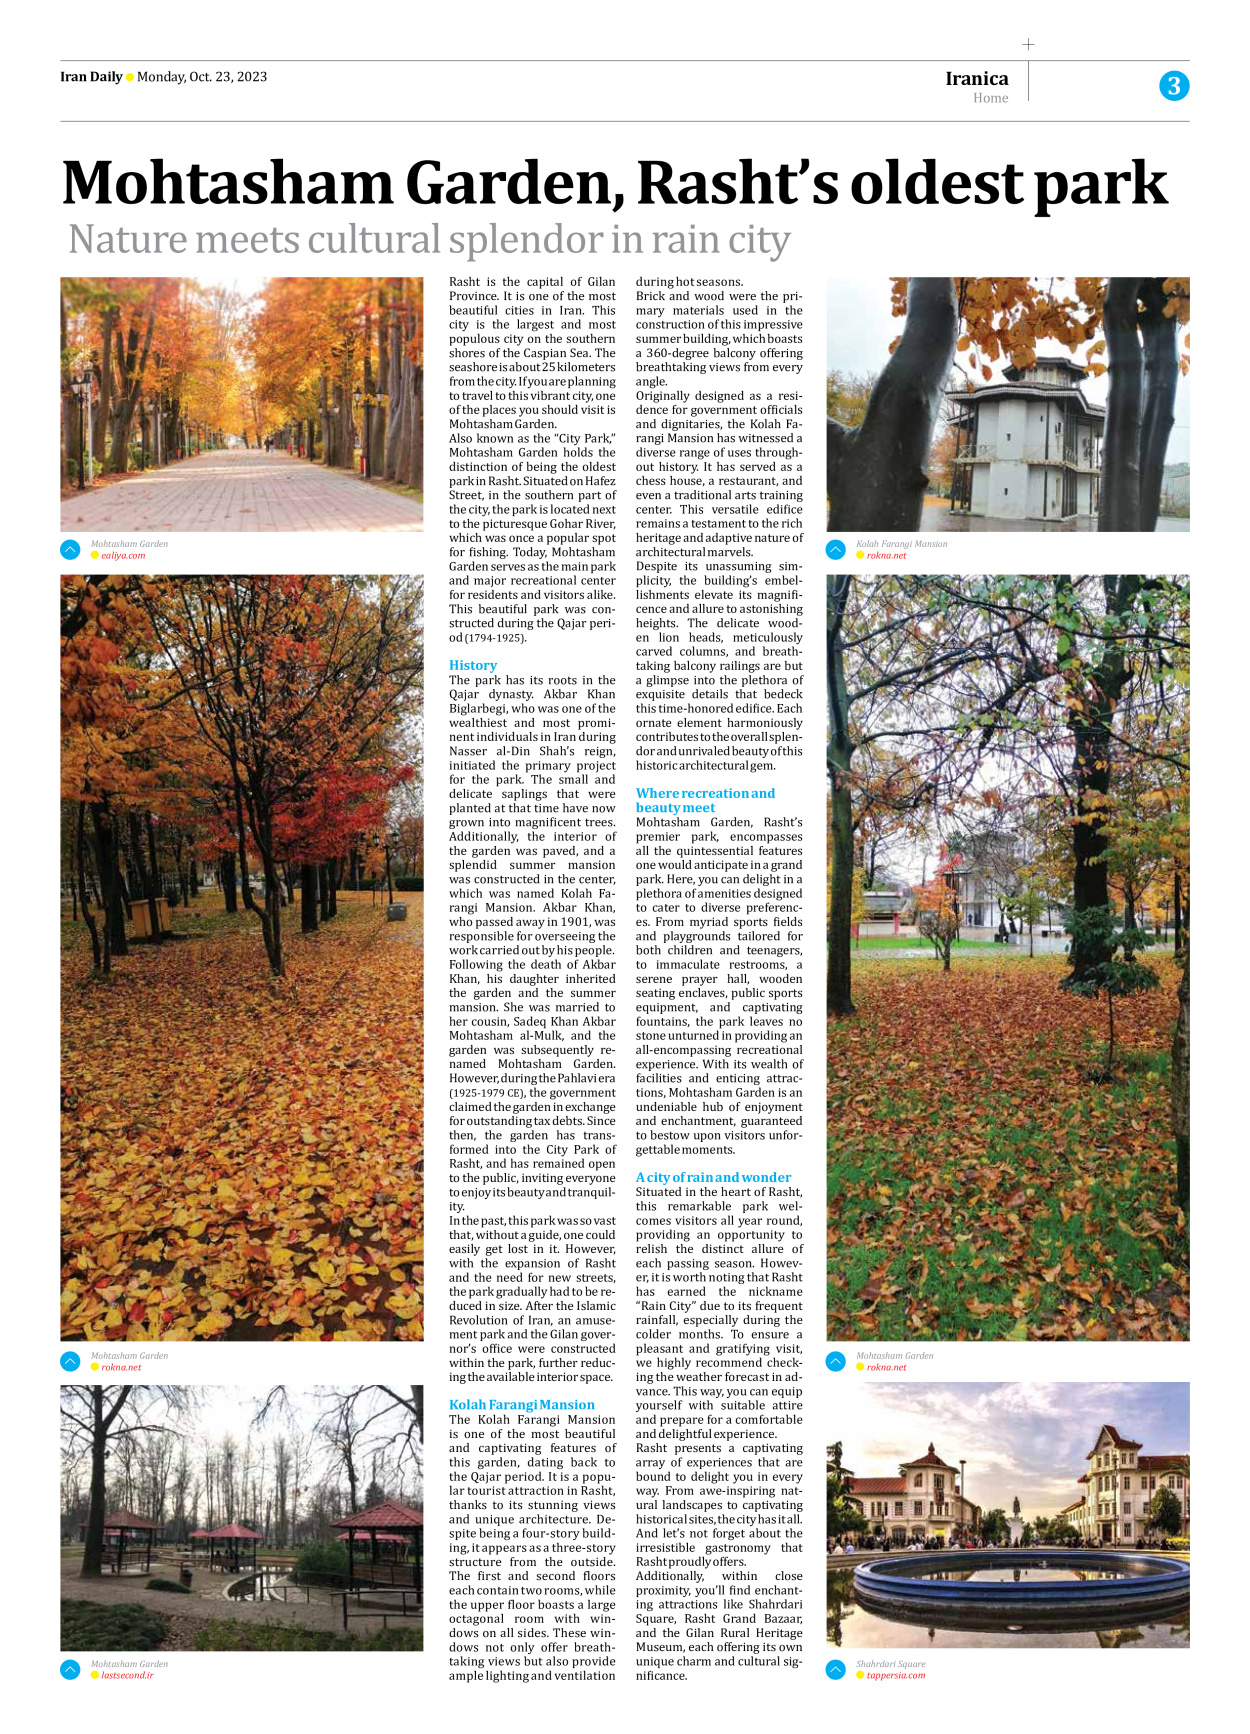 Iran Daily - Number Seven Thousand Four Hundred and Fifteen - 23 October 2023 - Page 3